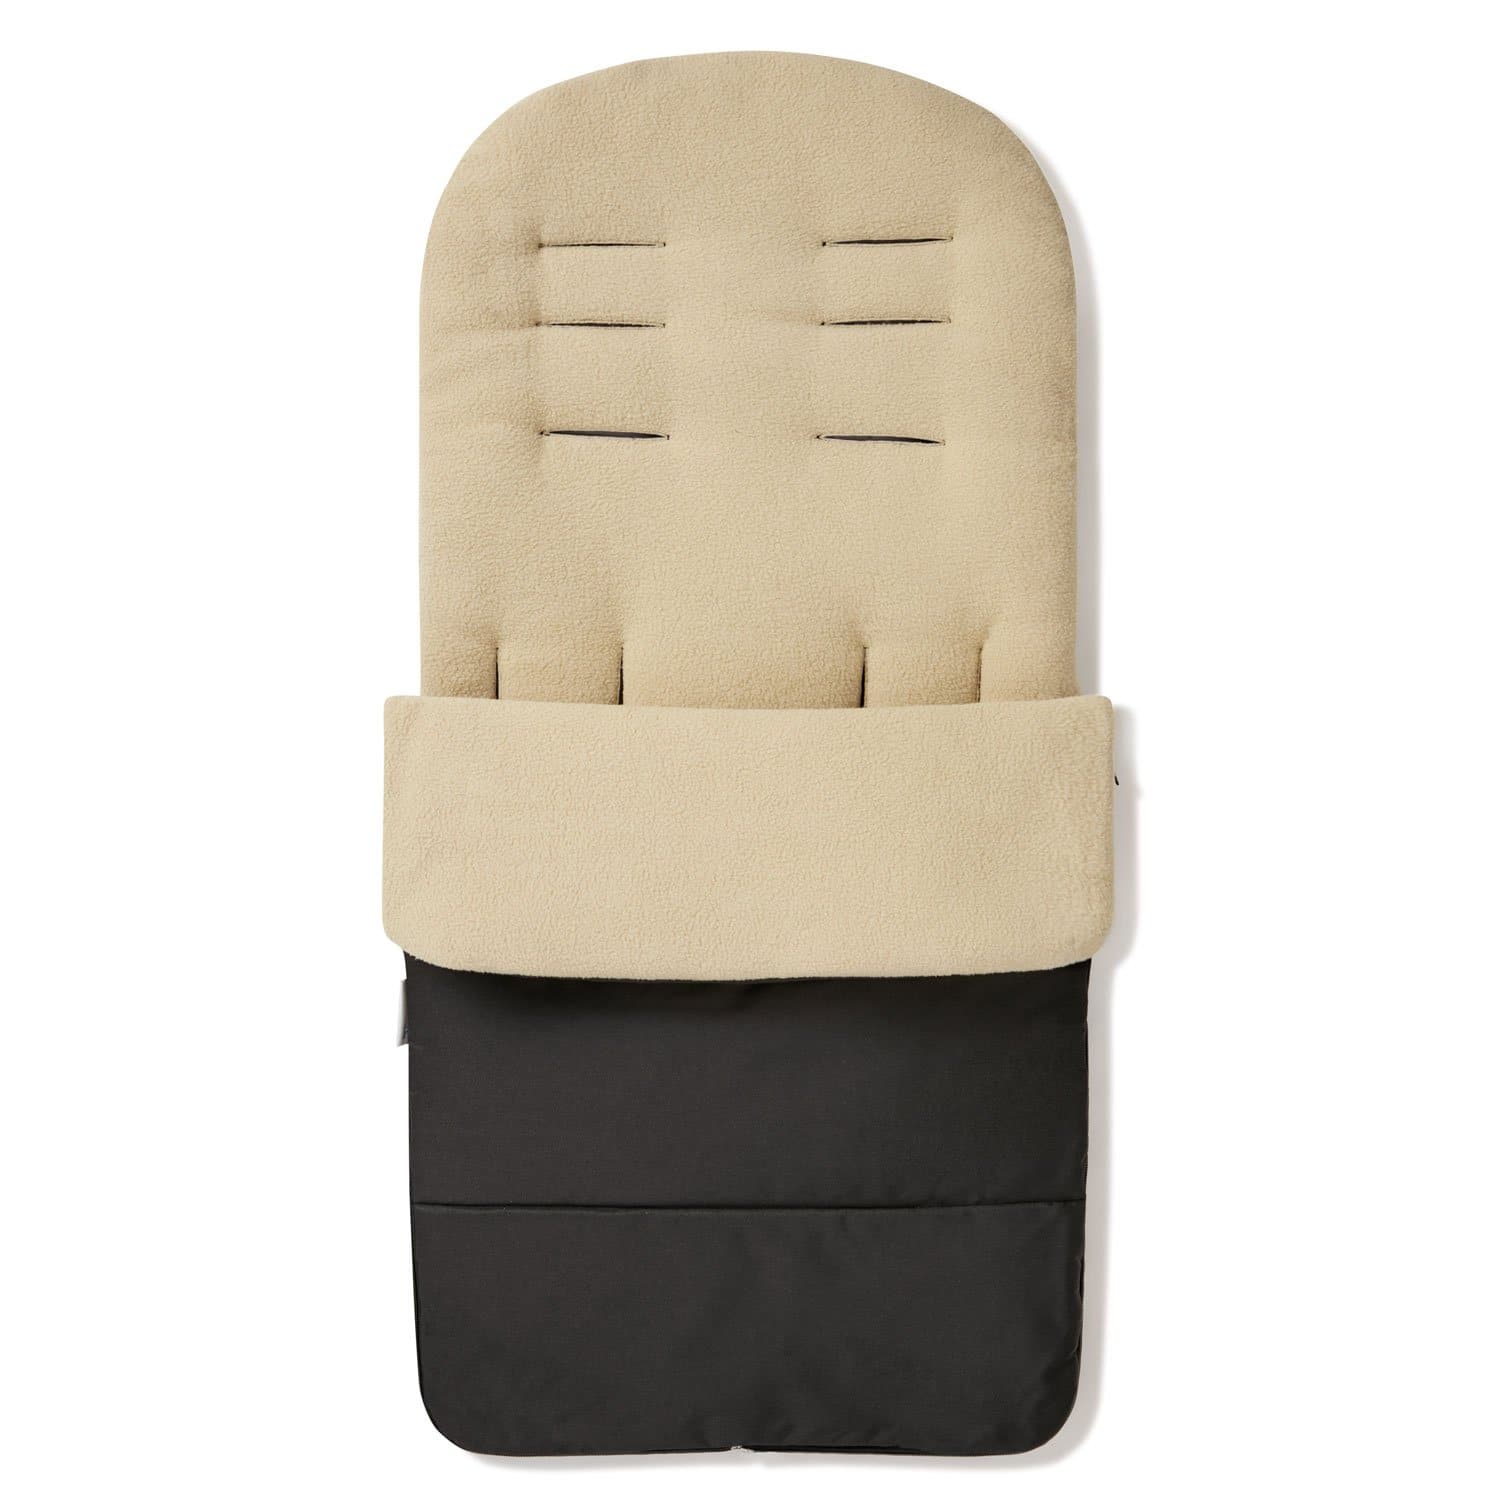 Premium Footmuff / Cosy Toes Compatible with Recaro - Desert Sand / Fits All Models | For Your Little One